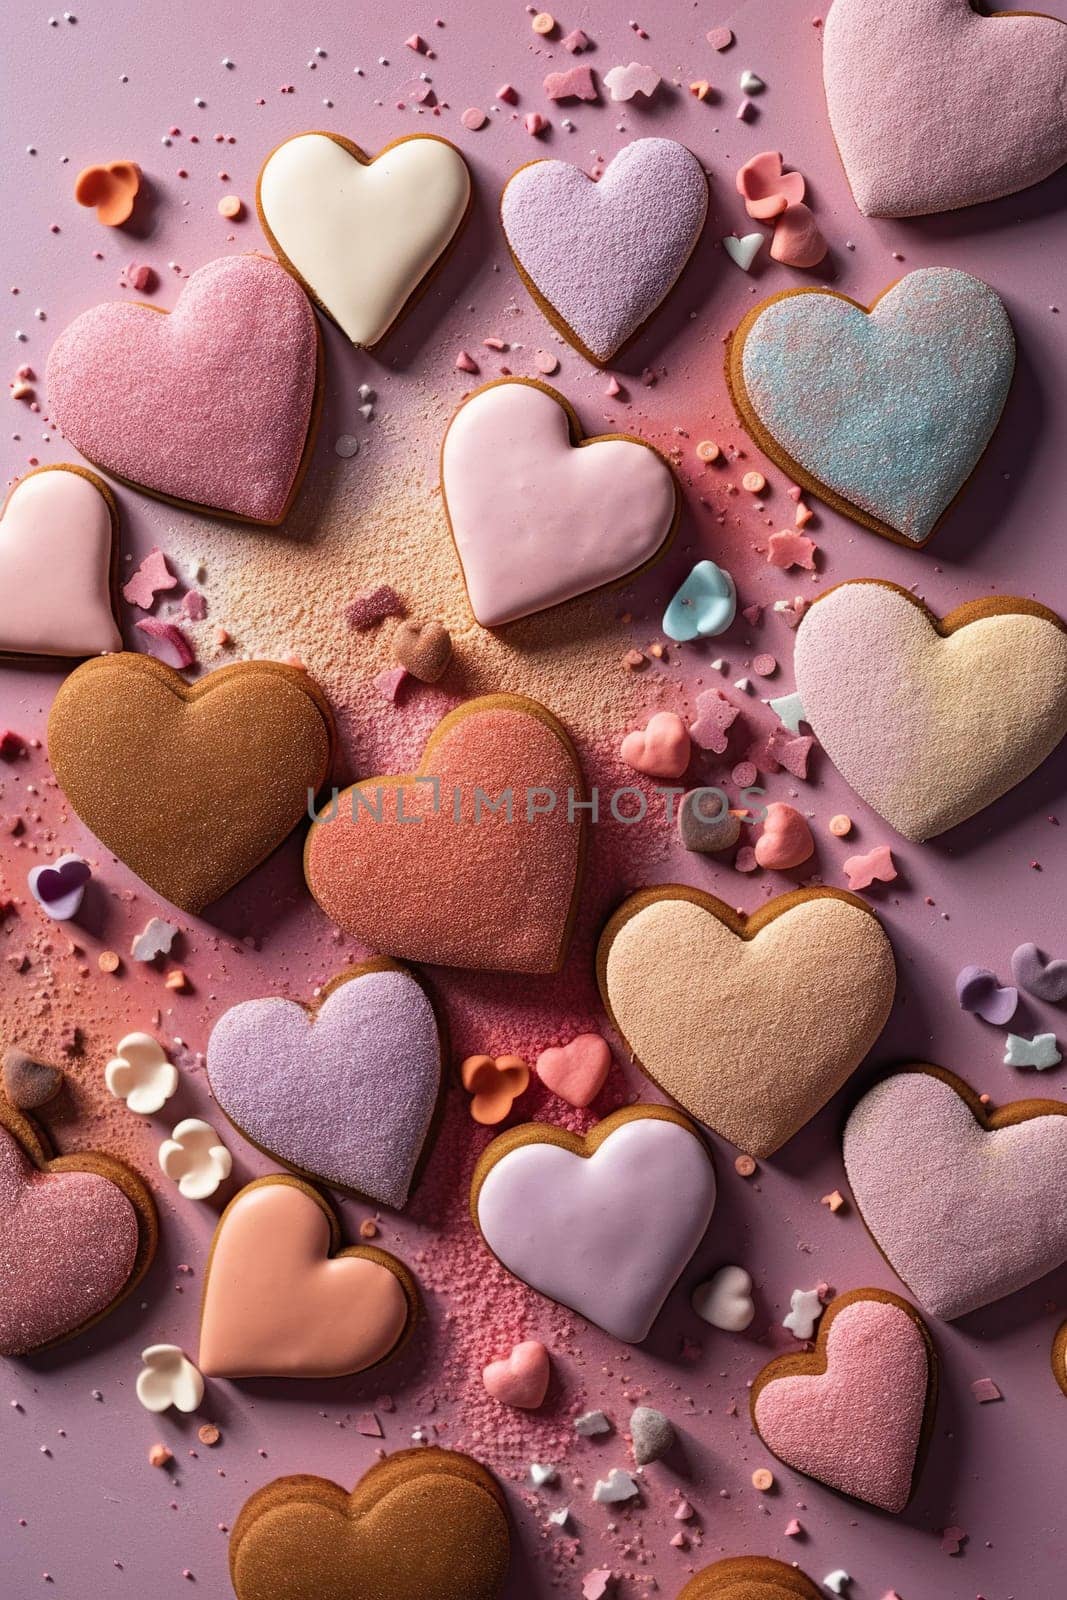 Gingerbreads In Heart Shape With Sweet Glaze In Pastel Colors, Valentine'S Day Concept